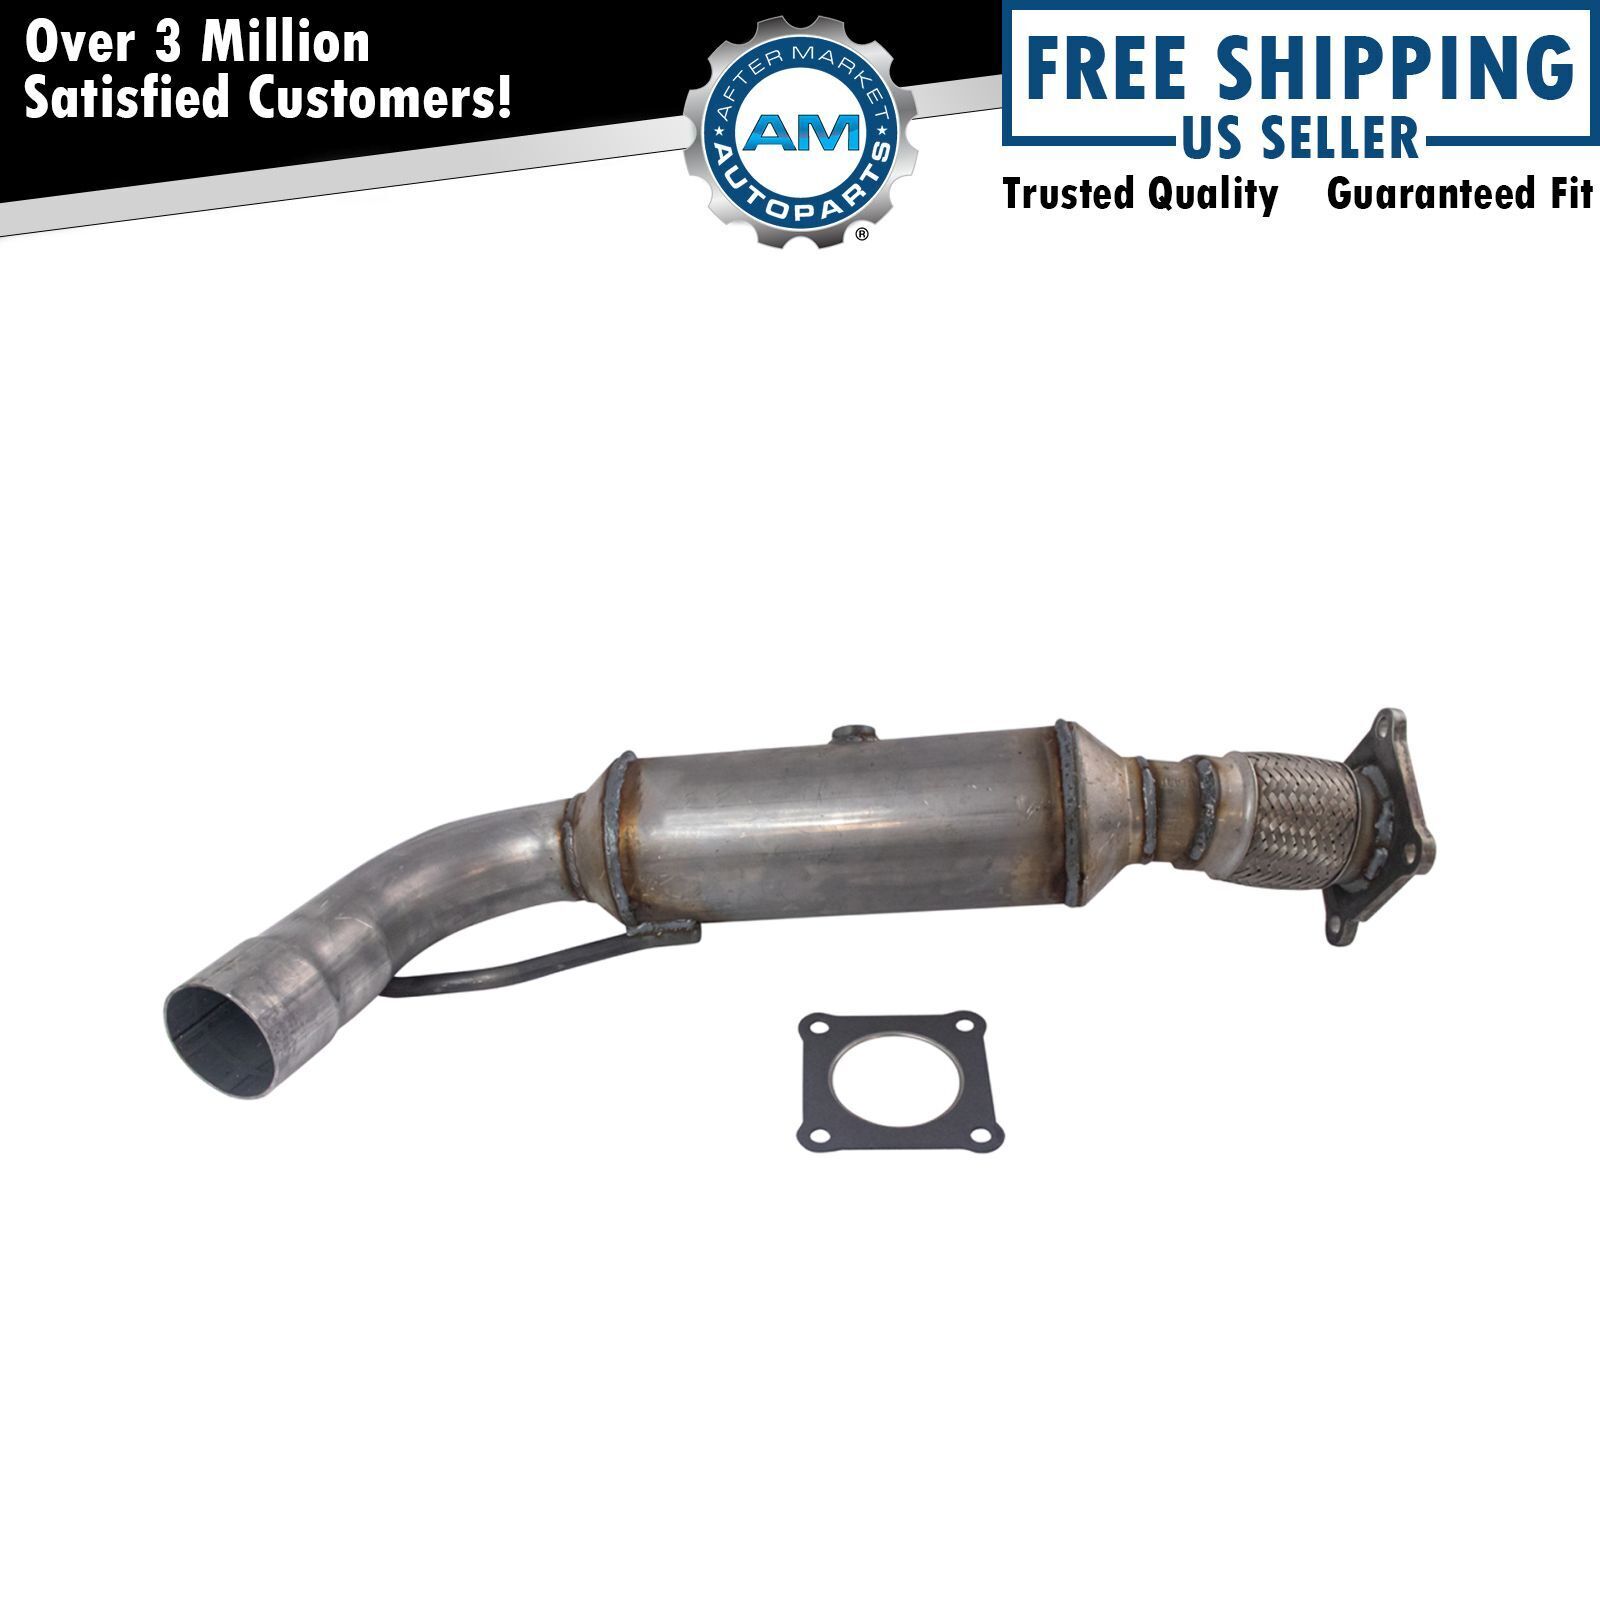 Rear Catalytic Converter Exhaust Pipe for Town & Country Grand Caravan Routan